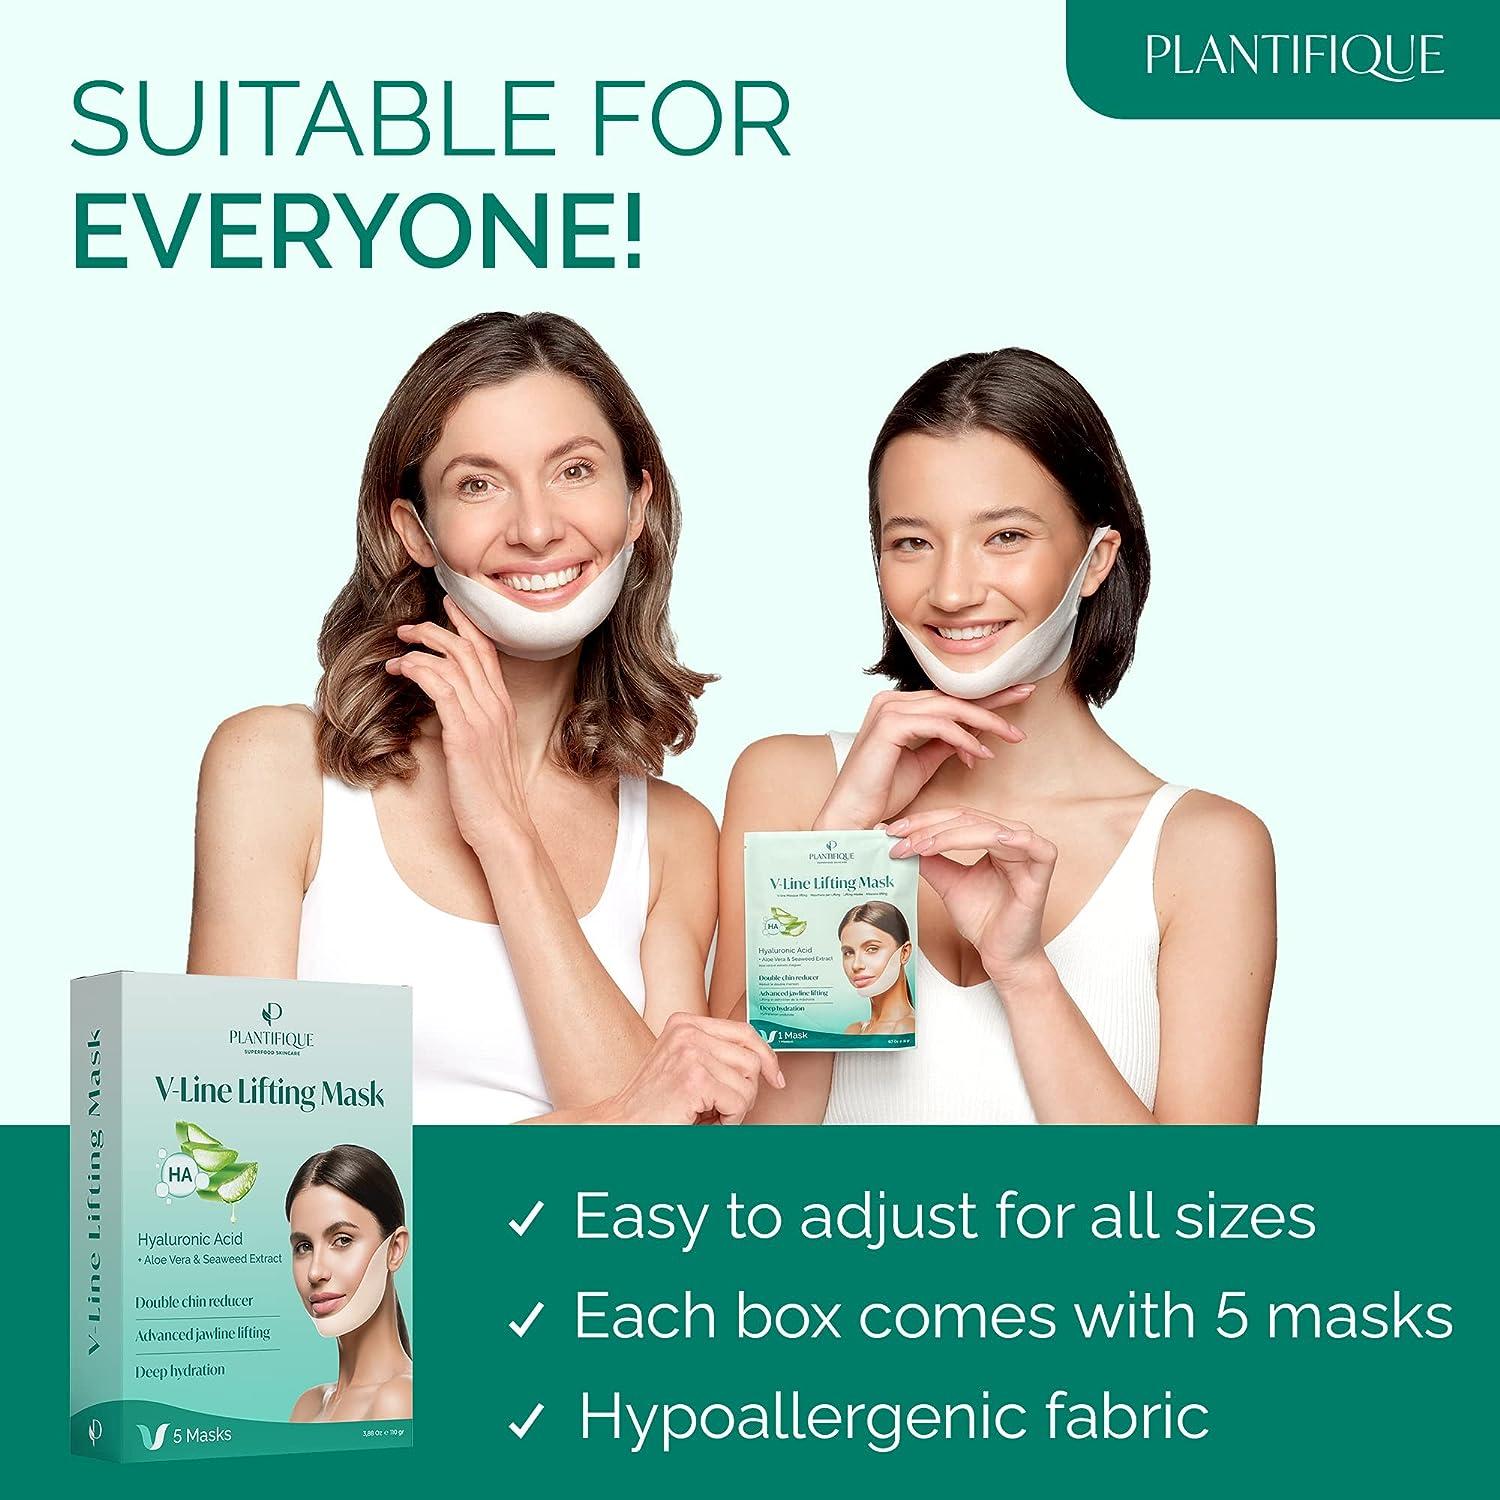 PLANTIFIQUE V-Line Lifting Face Mask - 5 PCS V Shape Face Lift Tape Mask  for Skin Firming and Tightening - Double Chin Reducer Jawline Sculptor for  Women & Men - Anti-Aging, Contouring